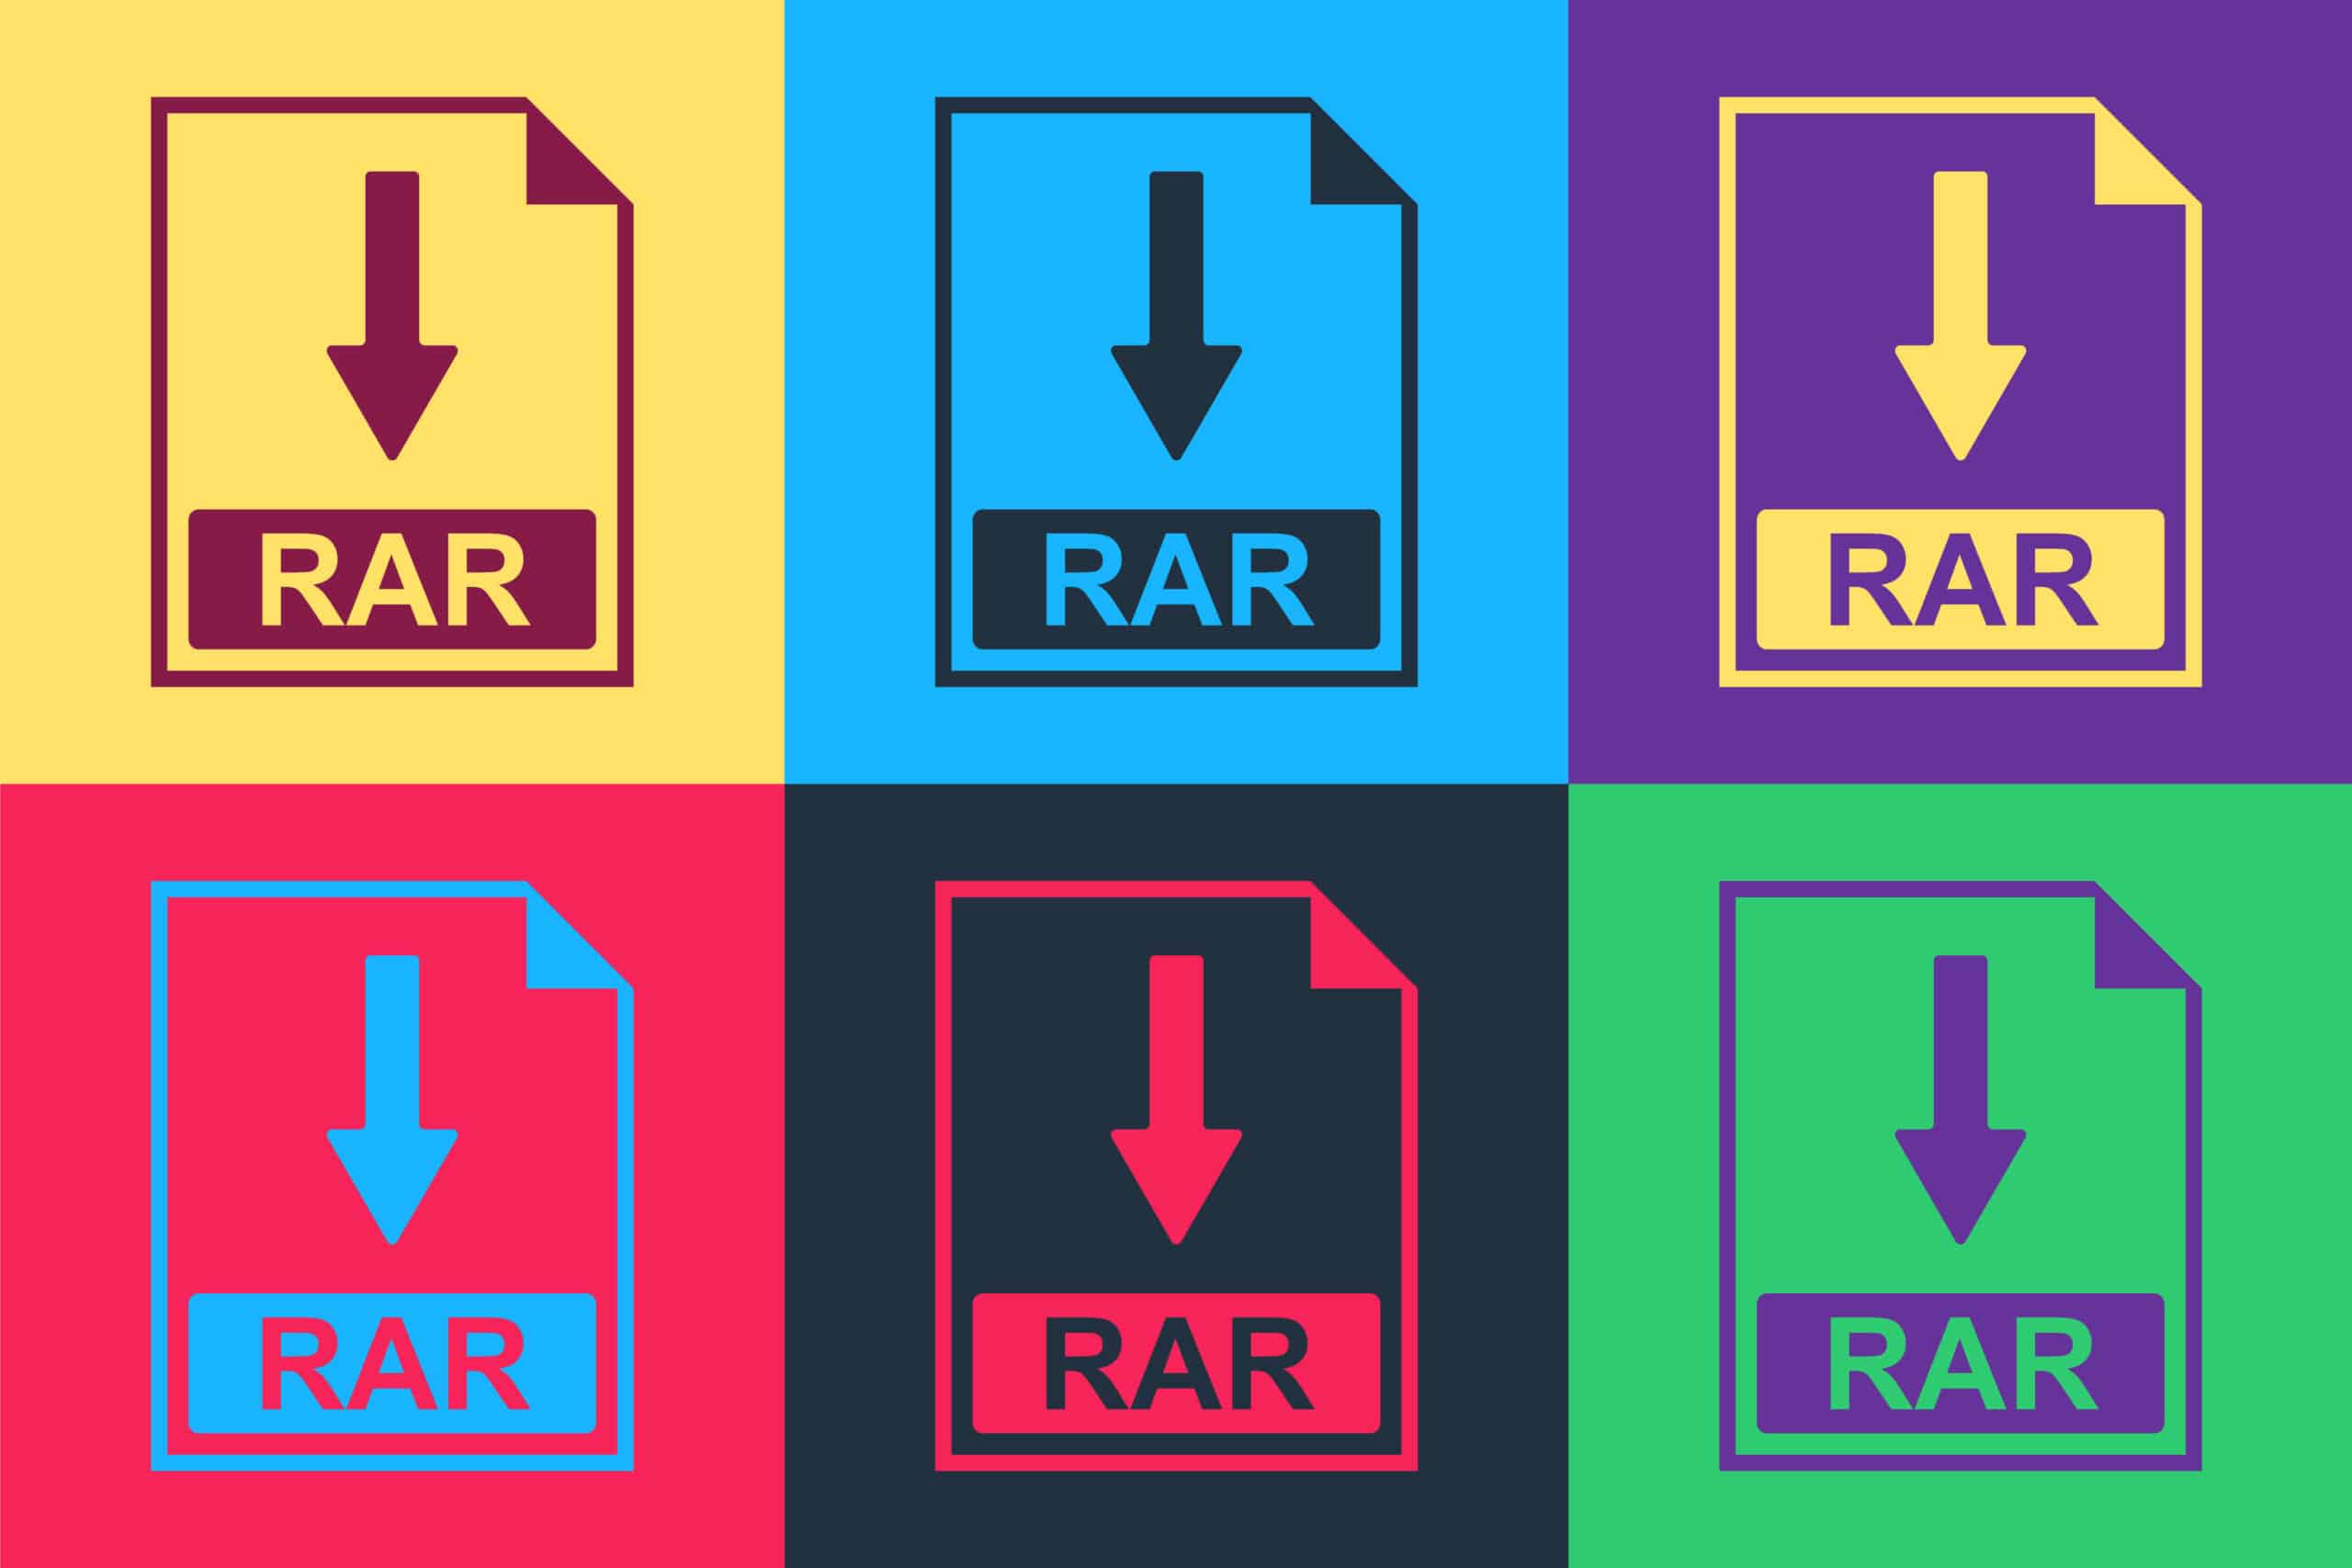 Windows finally adds native support for RAR files